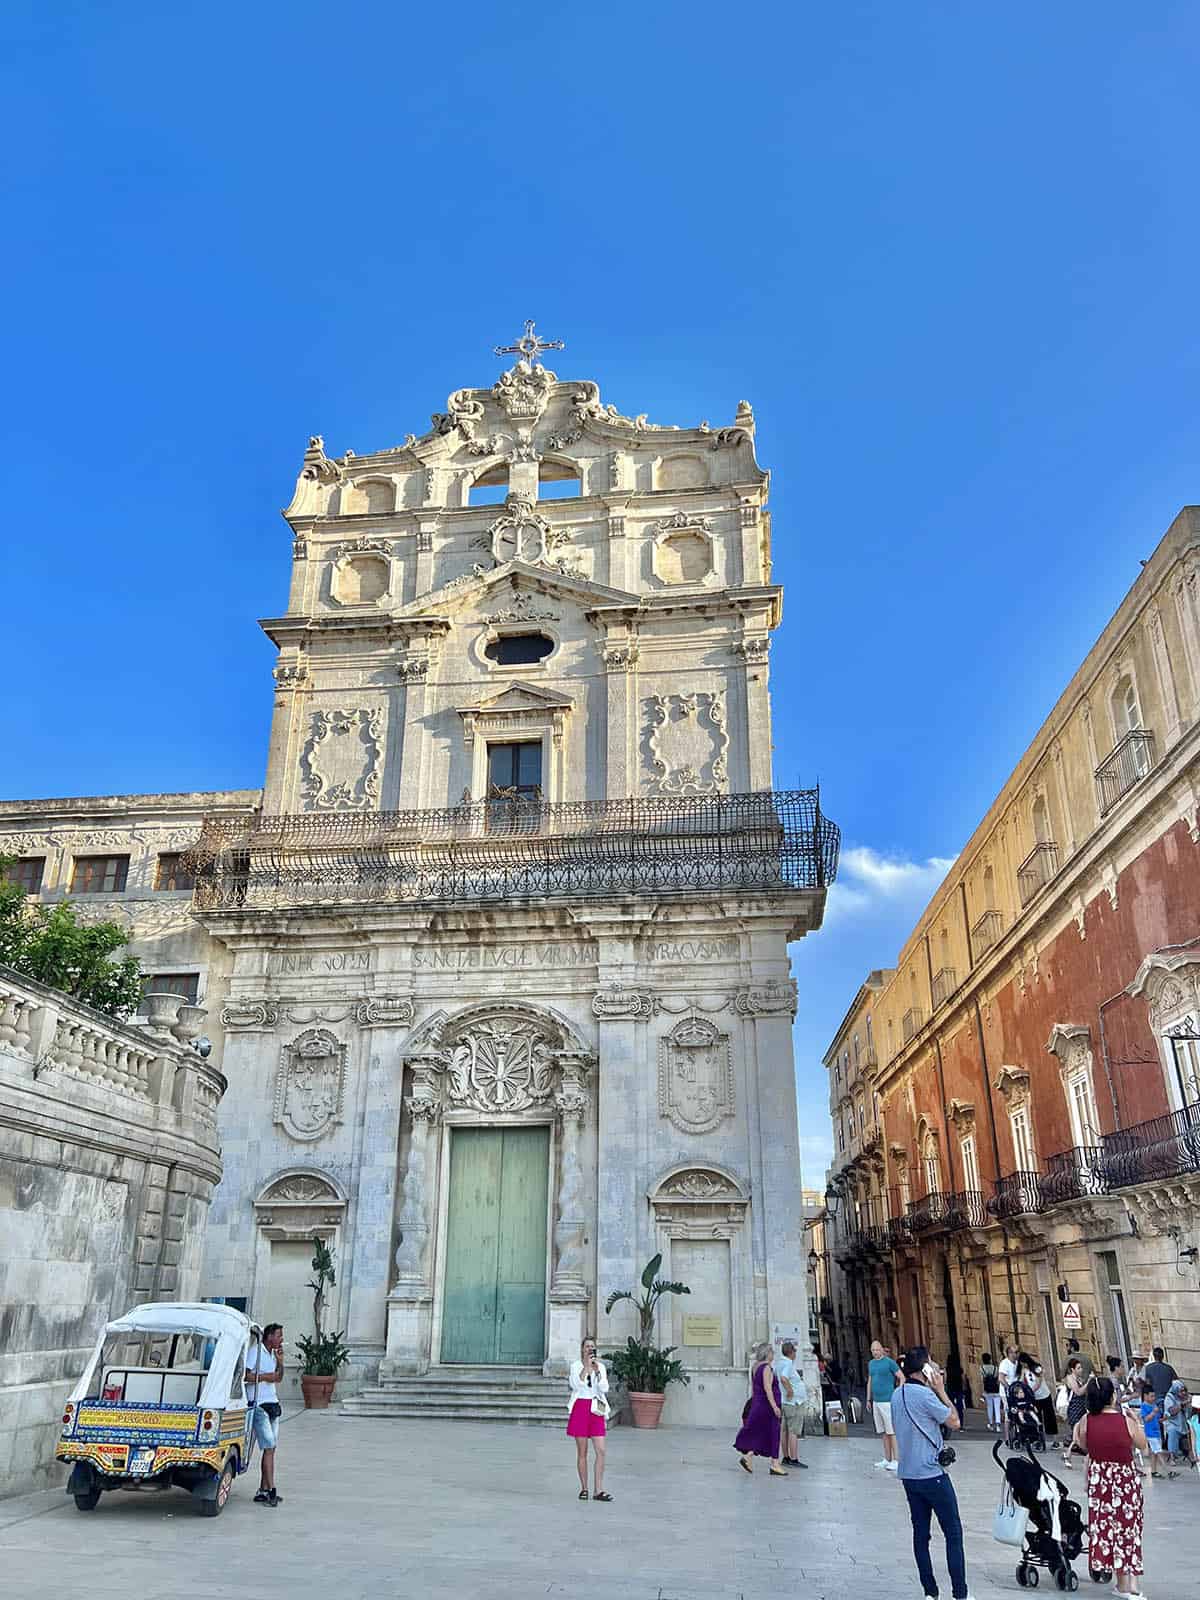 An image of some of the beautiful old buildings in Piazza Duomo in Ortigia, Sicily.